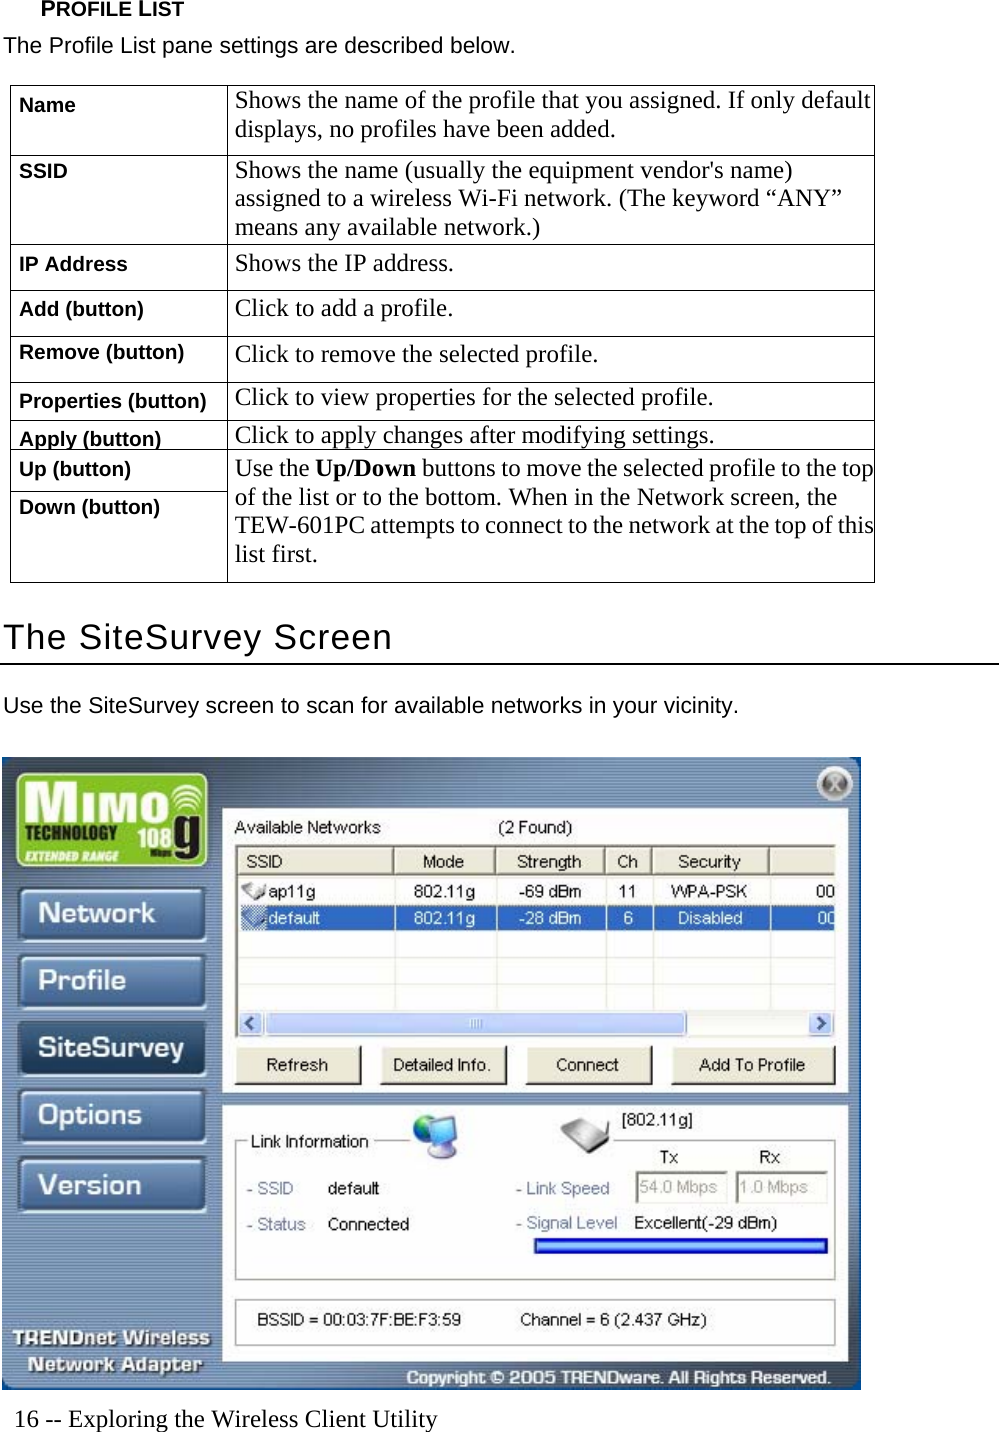   16 -- Exploring the Wireless Client Utility PROFILE LIST The Profile List pane settings are described below. Name Shows the name of the profile that you assigned. If only default displays, no profiles have been added. SSID Shows the name (usually the equipment vendor&apos;s name) assigned to a wireless Wi-Fi network. (The keyword “ANY” means any available network.) IP Address Shows the IP address. Add (button) Click to add a profile. Remove (button) Click to remove the selected profile. Properties (button) Click to view properties for the selected profile. Apply (button) Click to apply changes after modifying settings. Up (button) Down (button) Use the Up/Down buttons to move the selected profile to the top of the list or to the bottom. When in the Network screen, the TEW-601PC attempts to connect to the network at the top of thislist first. The SiteSurvey Screen Use the SiteSurvey screen to scan for available networks in your vicinity.  